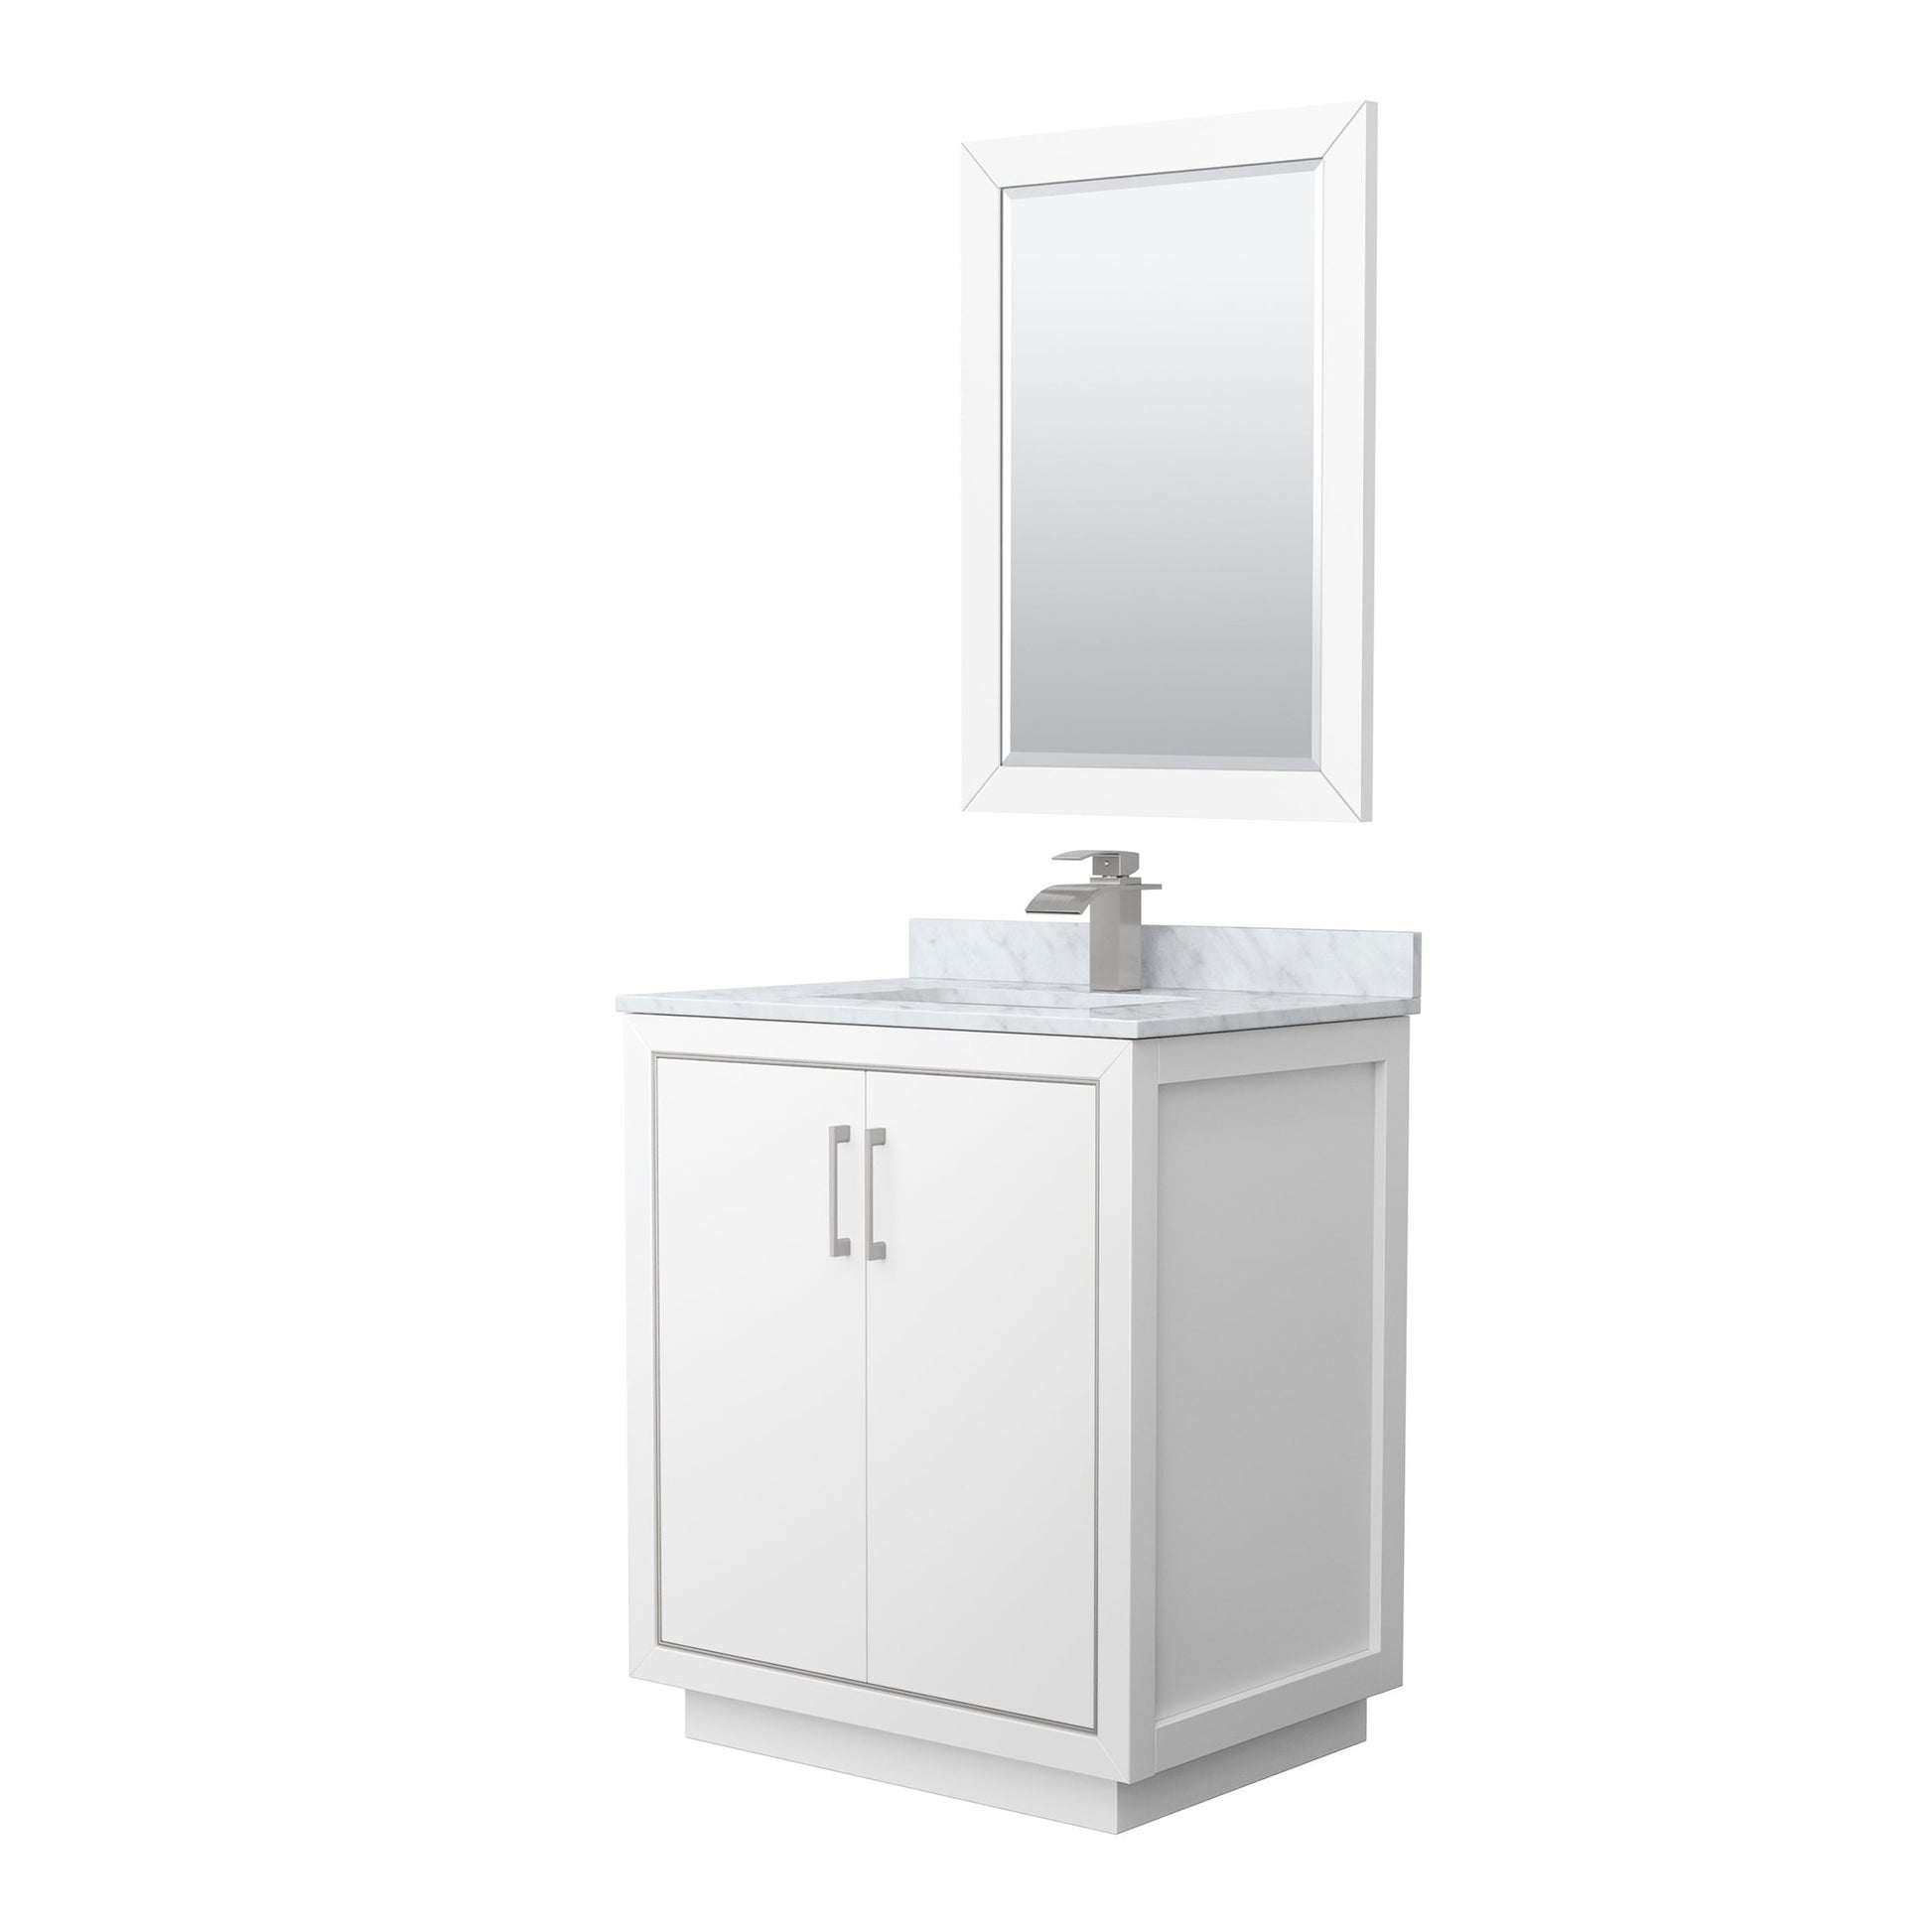 Wyndham Collection Icon 30" Single Bathroom Vanity in White, White Carrara Marble Countertop, Undermount Square Sink, Brushed Nickel Trim, 24" Mirror